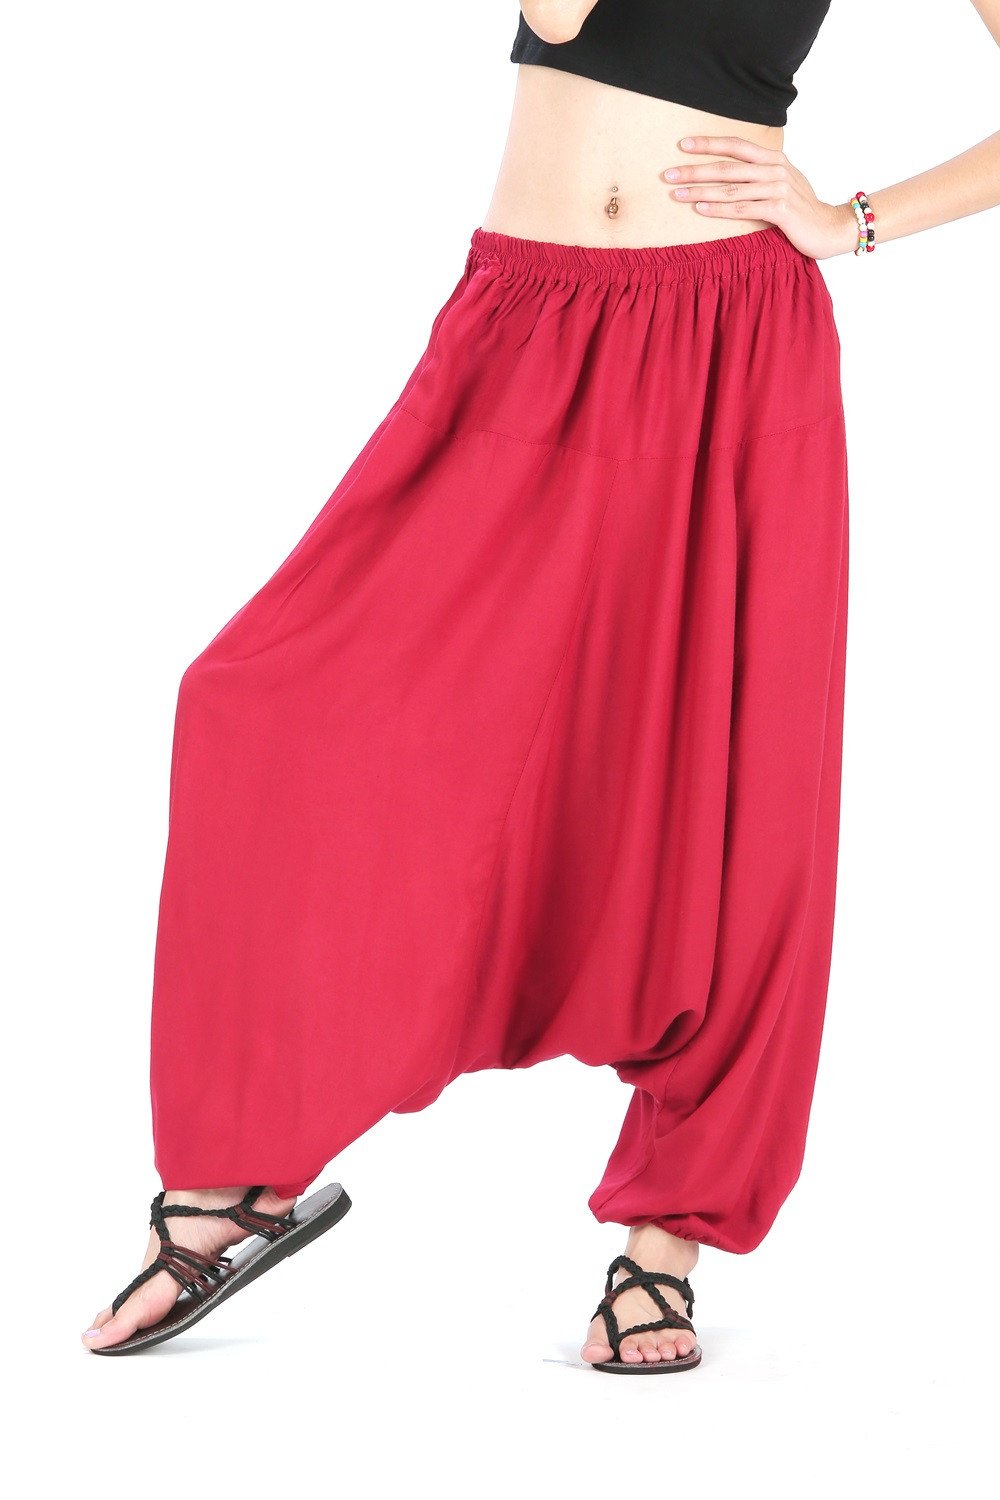 Buy Rayon Red Harem Pants for Women Online @ ₹499 from ShopClues